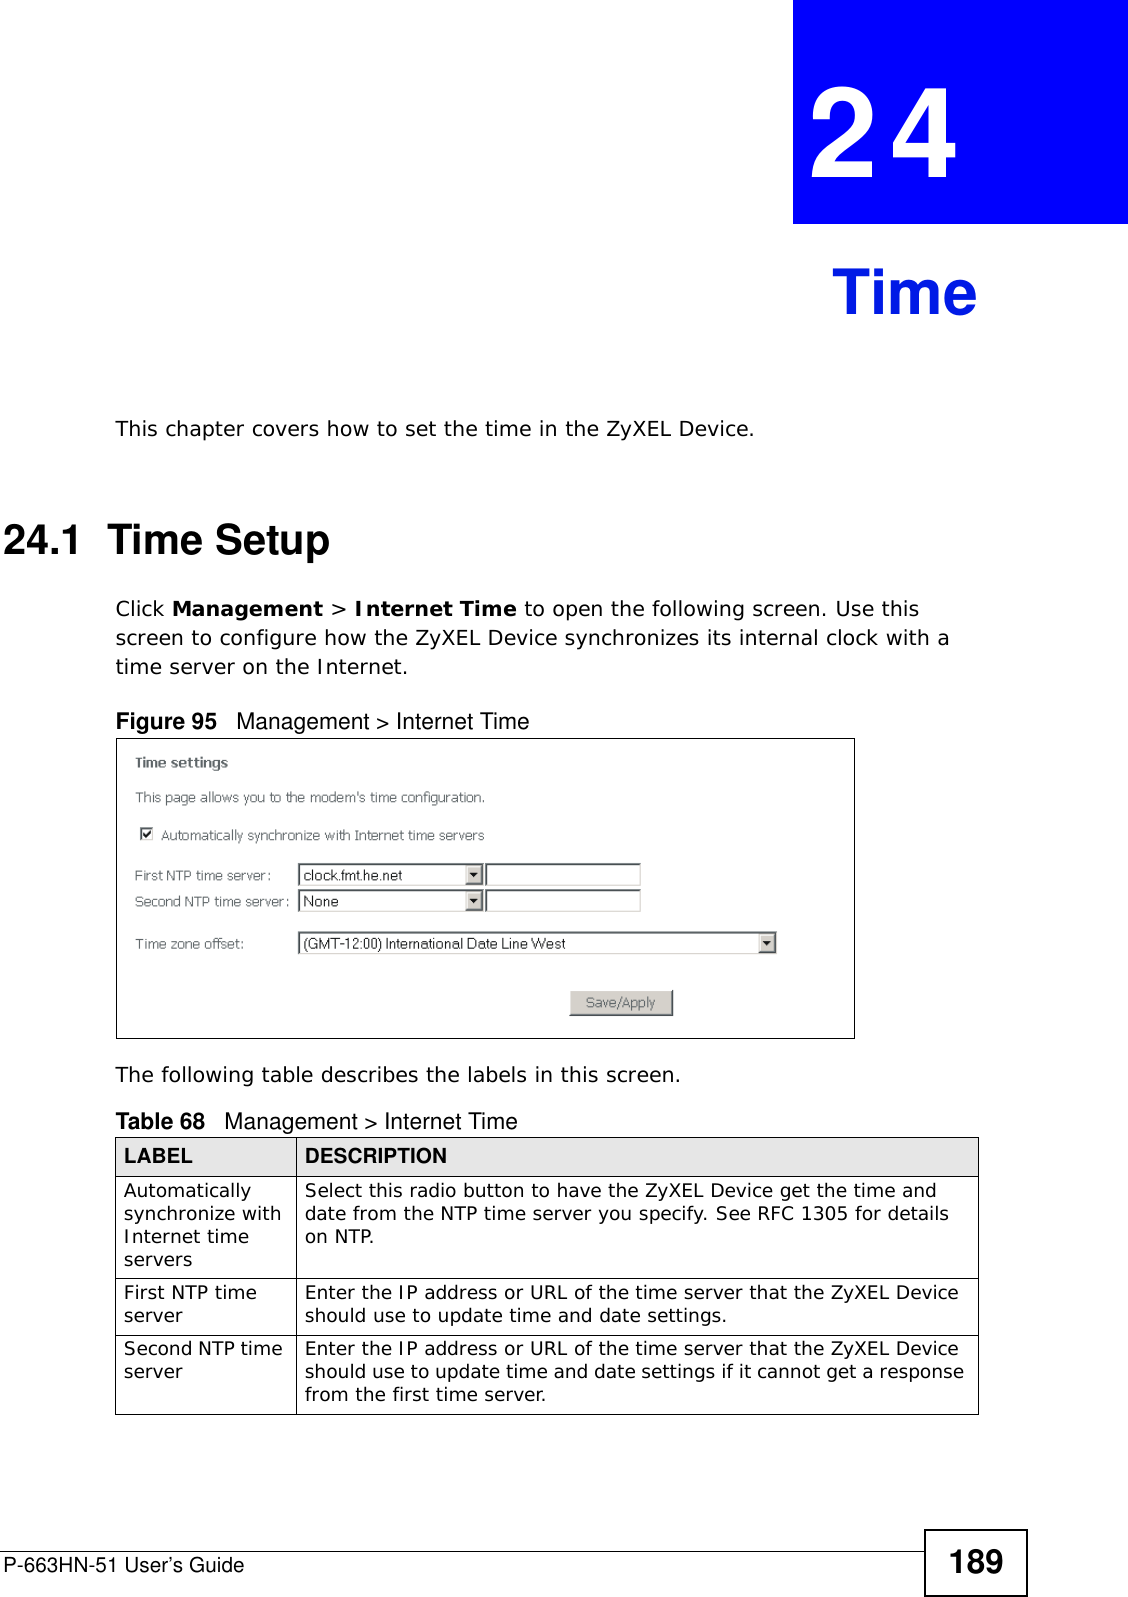 P-663HN-51 User’s Guide 189CHAPTER  24 TimeThis chapter covers how to set the time in the ZyXEL Device.24.1  Time Setup Click Management &gt; Internet Time to open the following screen. Use this screen to configure how the ZyXEL Device synchronizes its internal clock with a time server on the Internet. Figure 95   Management &gt; Internet TimeThe following table describes the labels in this screen.  Table 68   Management &gt; Internet TimeLABEL DESCRIPTIONAutomatically synchronize with Internet time serversSelect this radio button to have the ZyXEL Device get the time and date from the NTP time server you specify. See RFC 1305 for details on NTP.First NTP time server Enter the IP address or URL of the time server that the ZyXEL Device should use to update time and date settings.Second NTP time server Enter the IP address or URL of the time server that the ZyXEL Device should use to update time and date settings if it cannot get a response from the first time server.